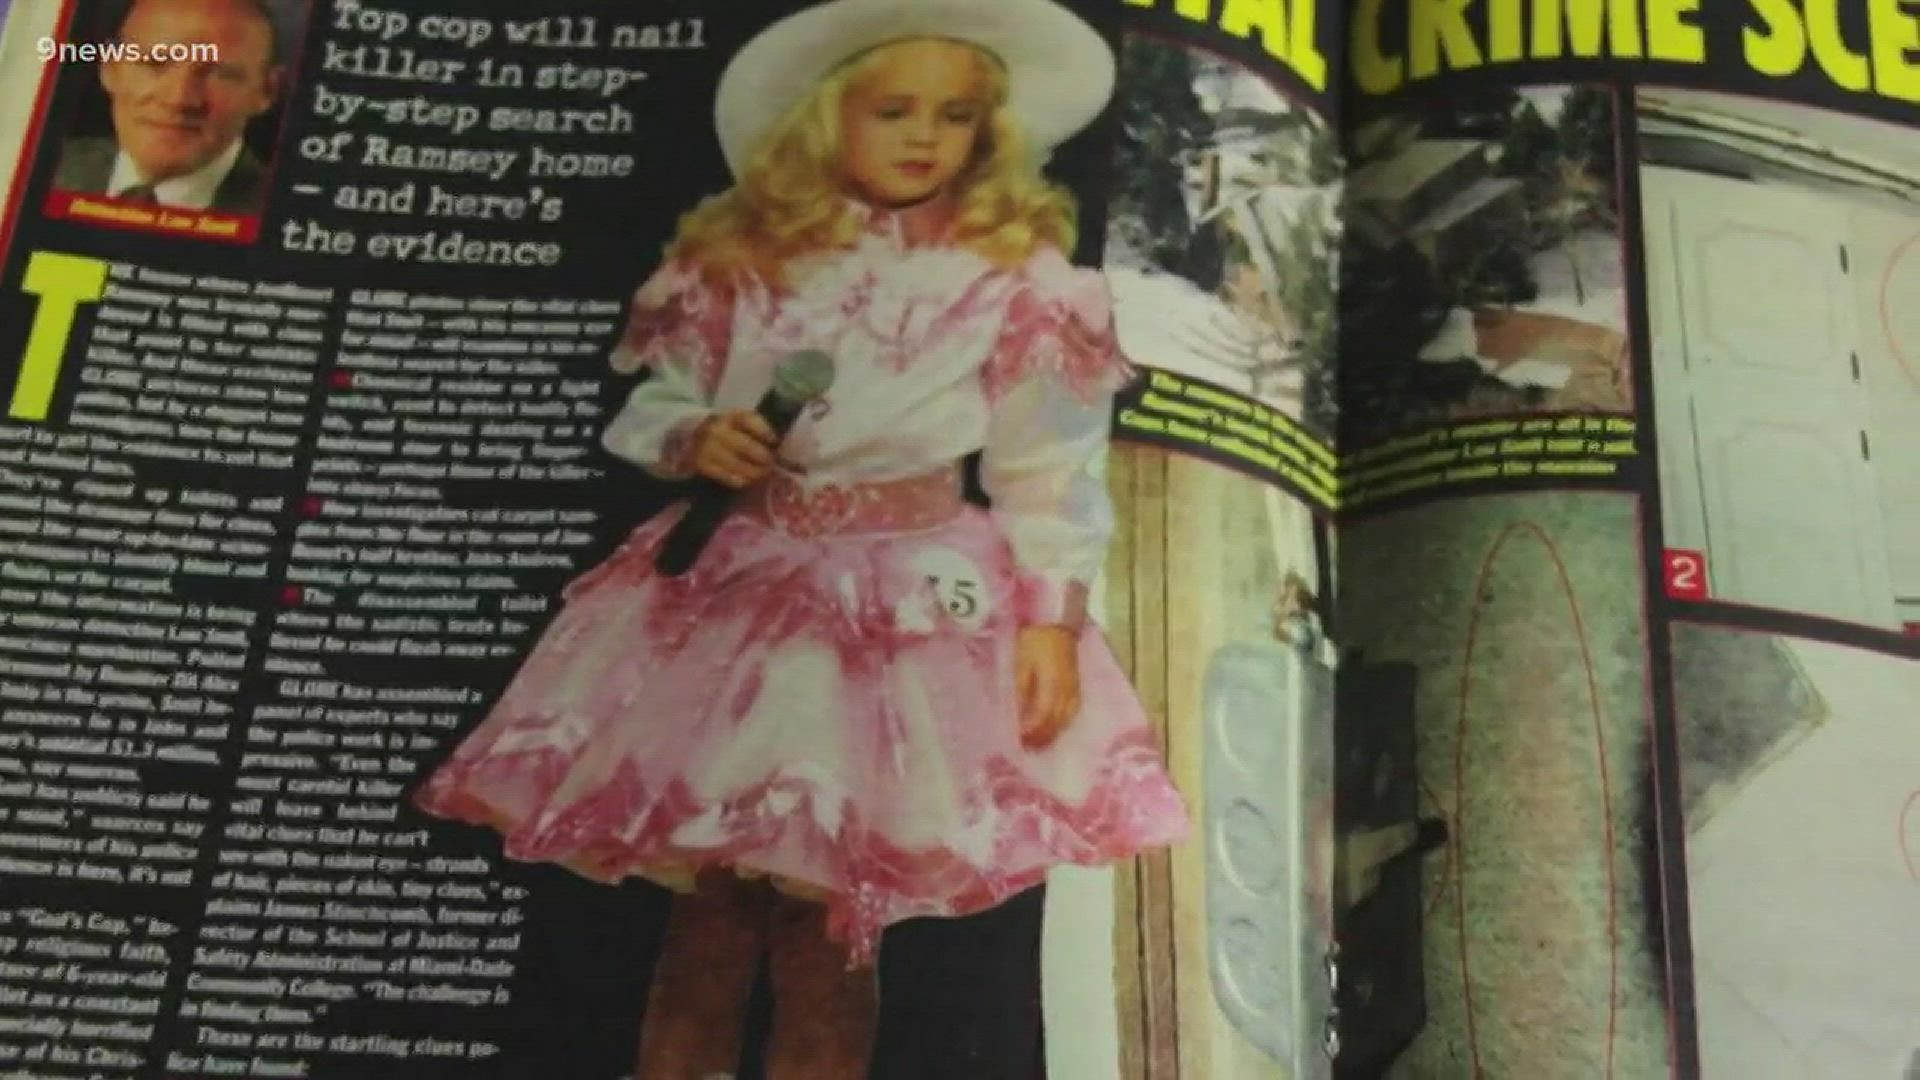 It's a headline that grabs attention, it says -  "I killed JonBenet" - and it appeared today in a British newspaper, but this is a story that needs a lot of context.